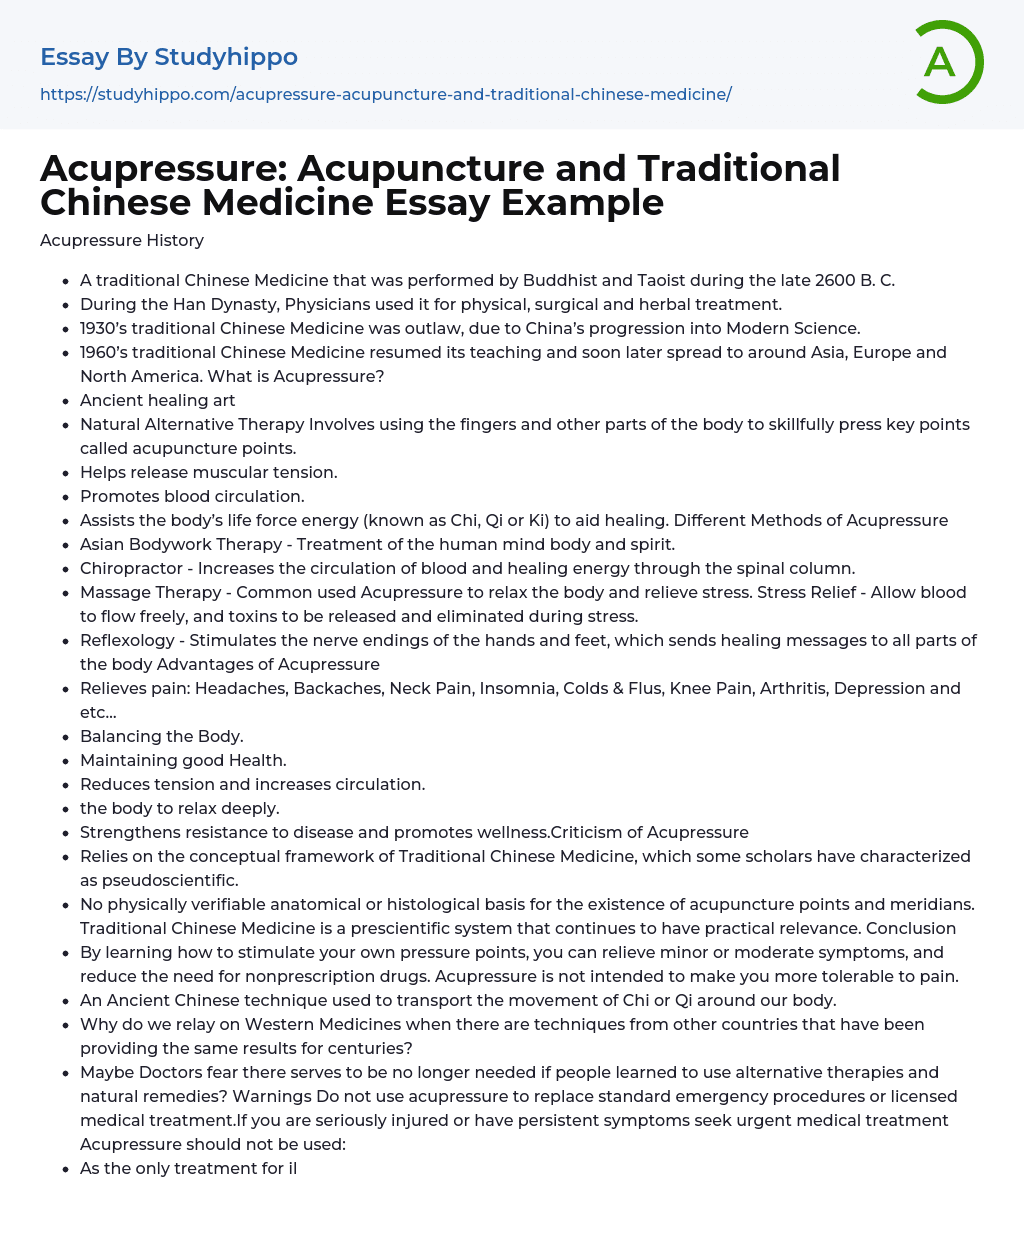 Acupressure: Acupuncture and Traditional Chinese Medicine Essay Example